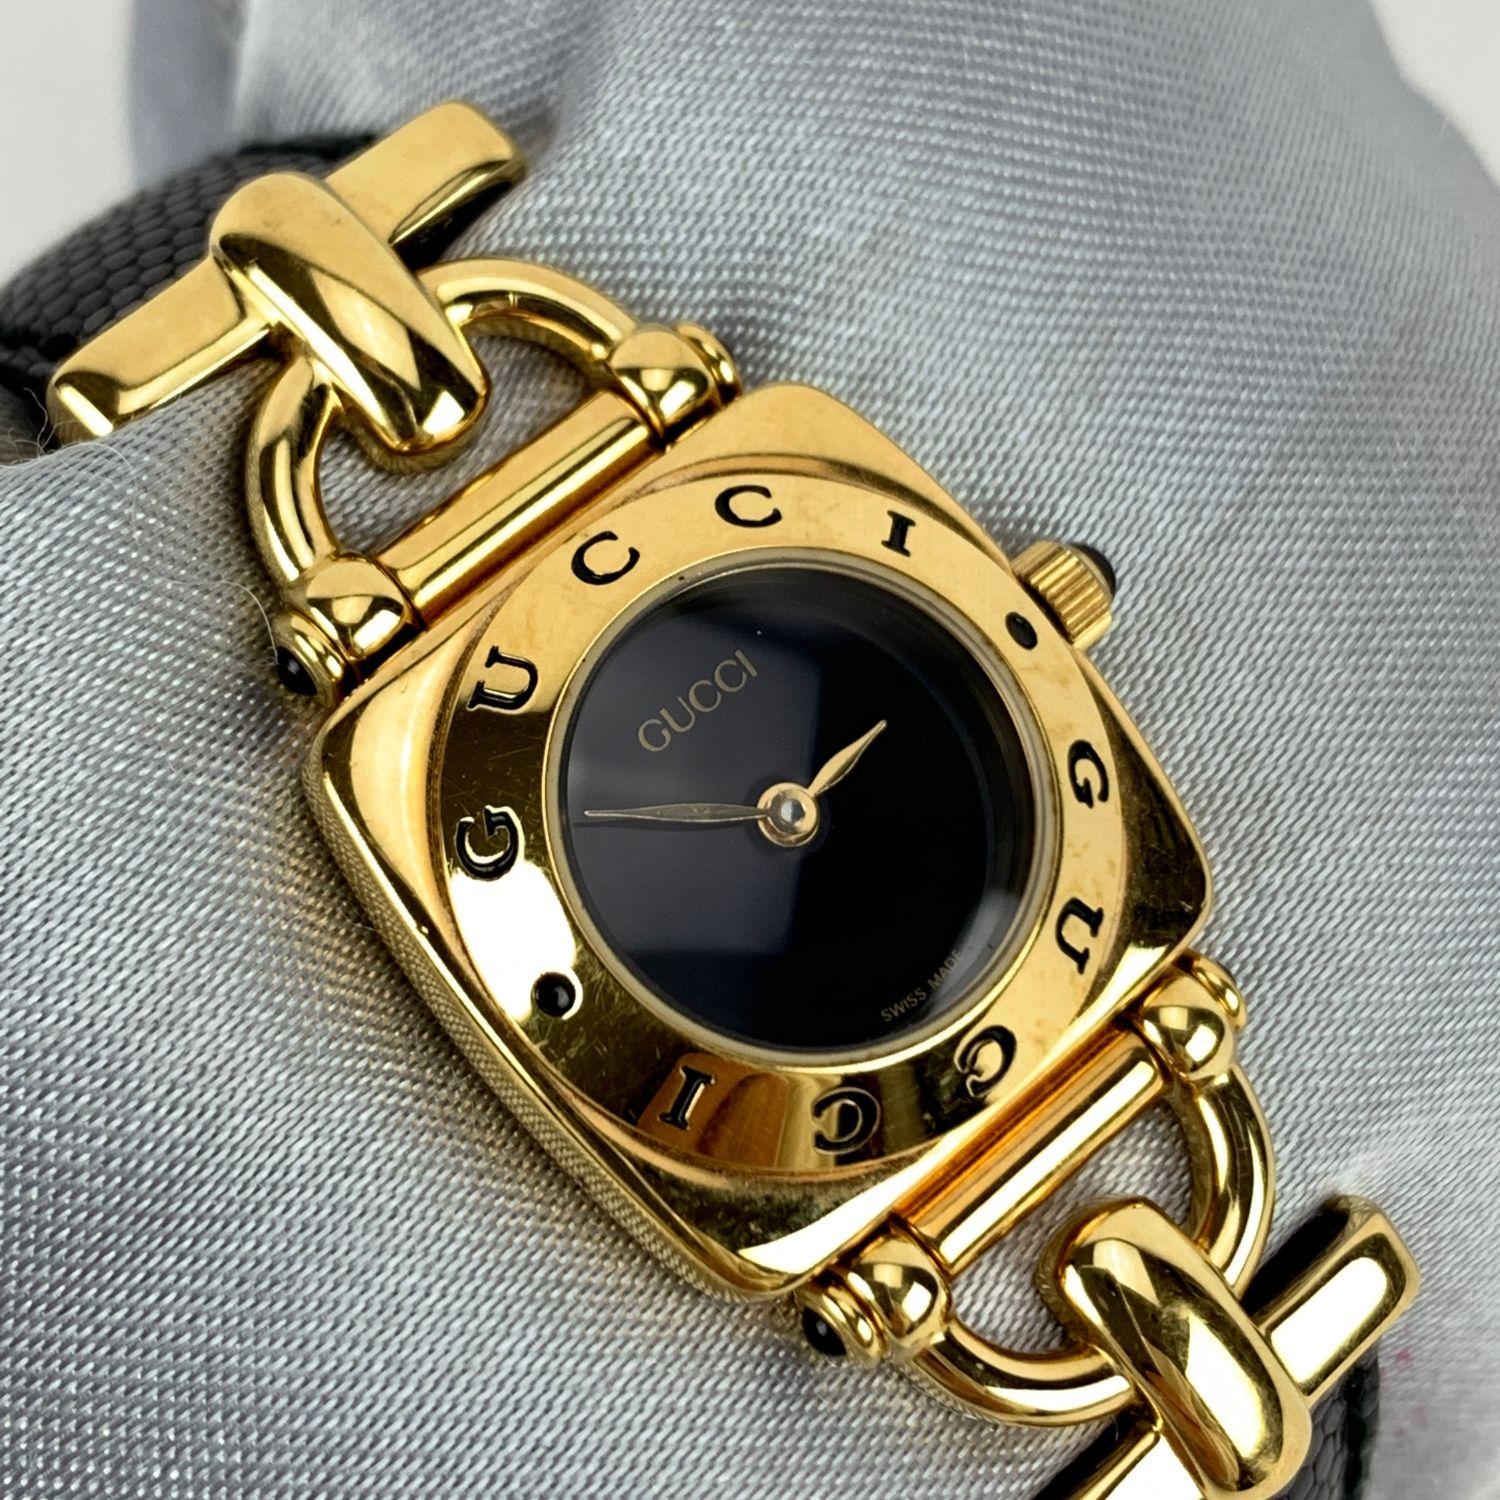 Gucci 6300 L Gold plated stainless steel wrist watch from the 90s. Black dial and Sapphire crystal. Swiss Made Quartz movement. Gucci written on face and on the bezel .Water Resistant to 3atm. Black leather trap with buckle closure (GG logo engraved